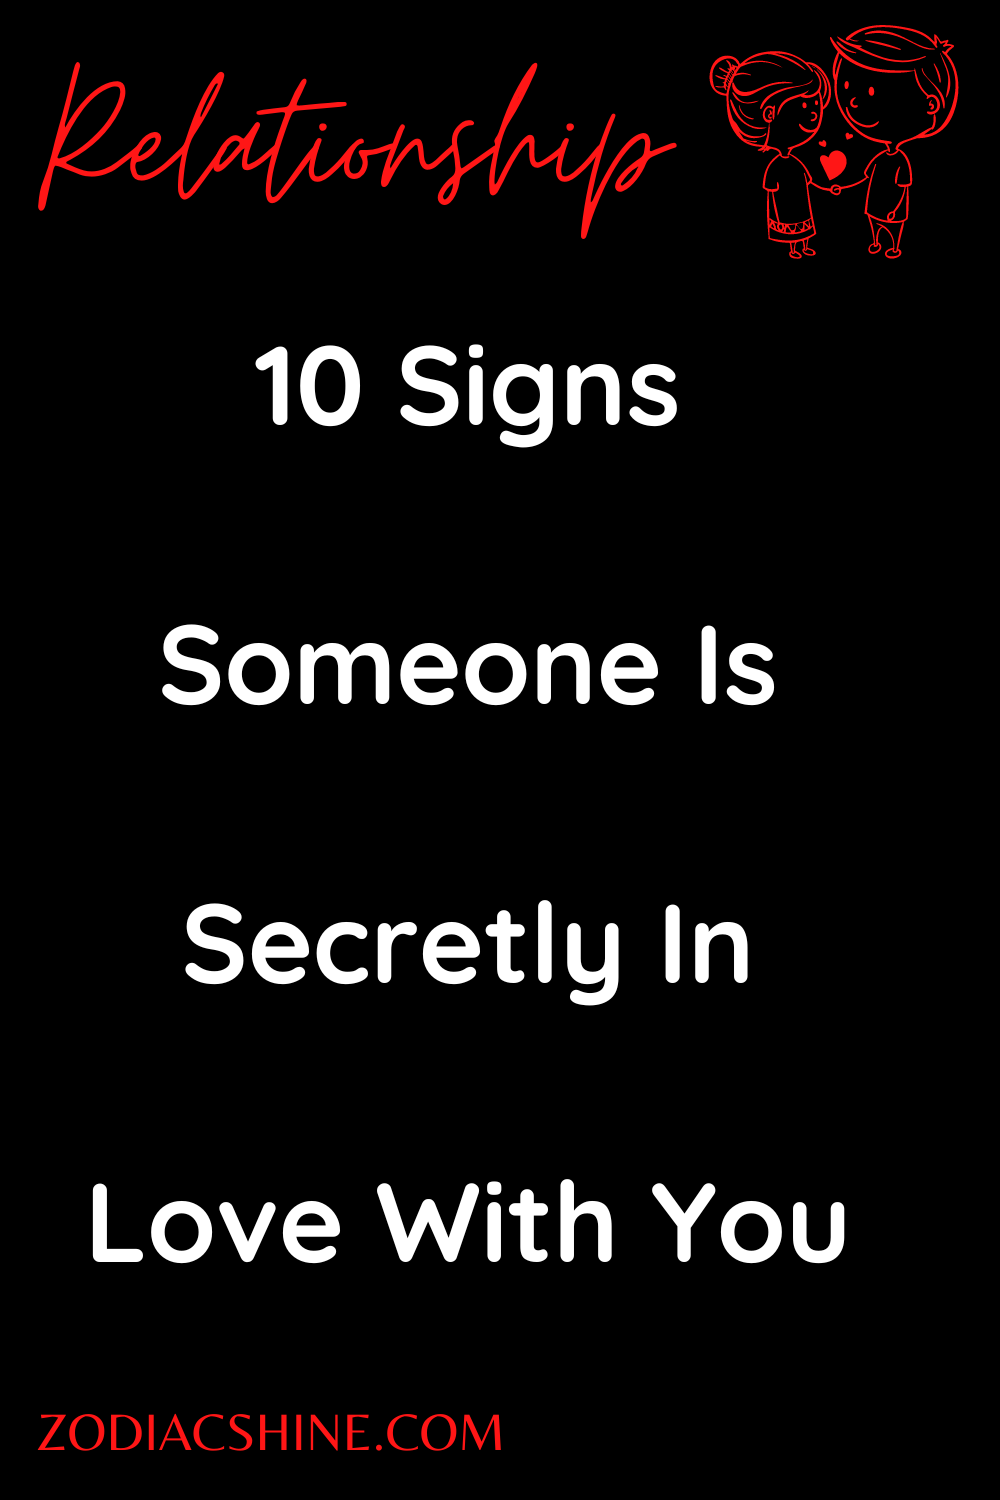 10 Signs Someone Is Secretly In Love With You